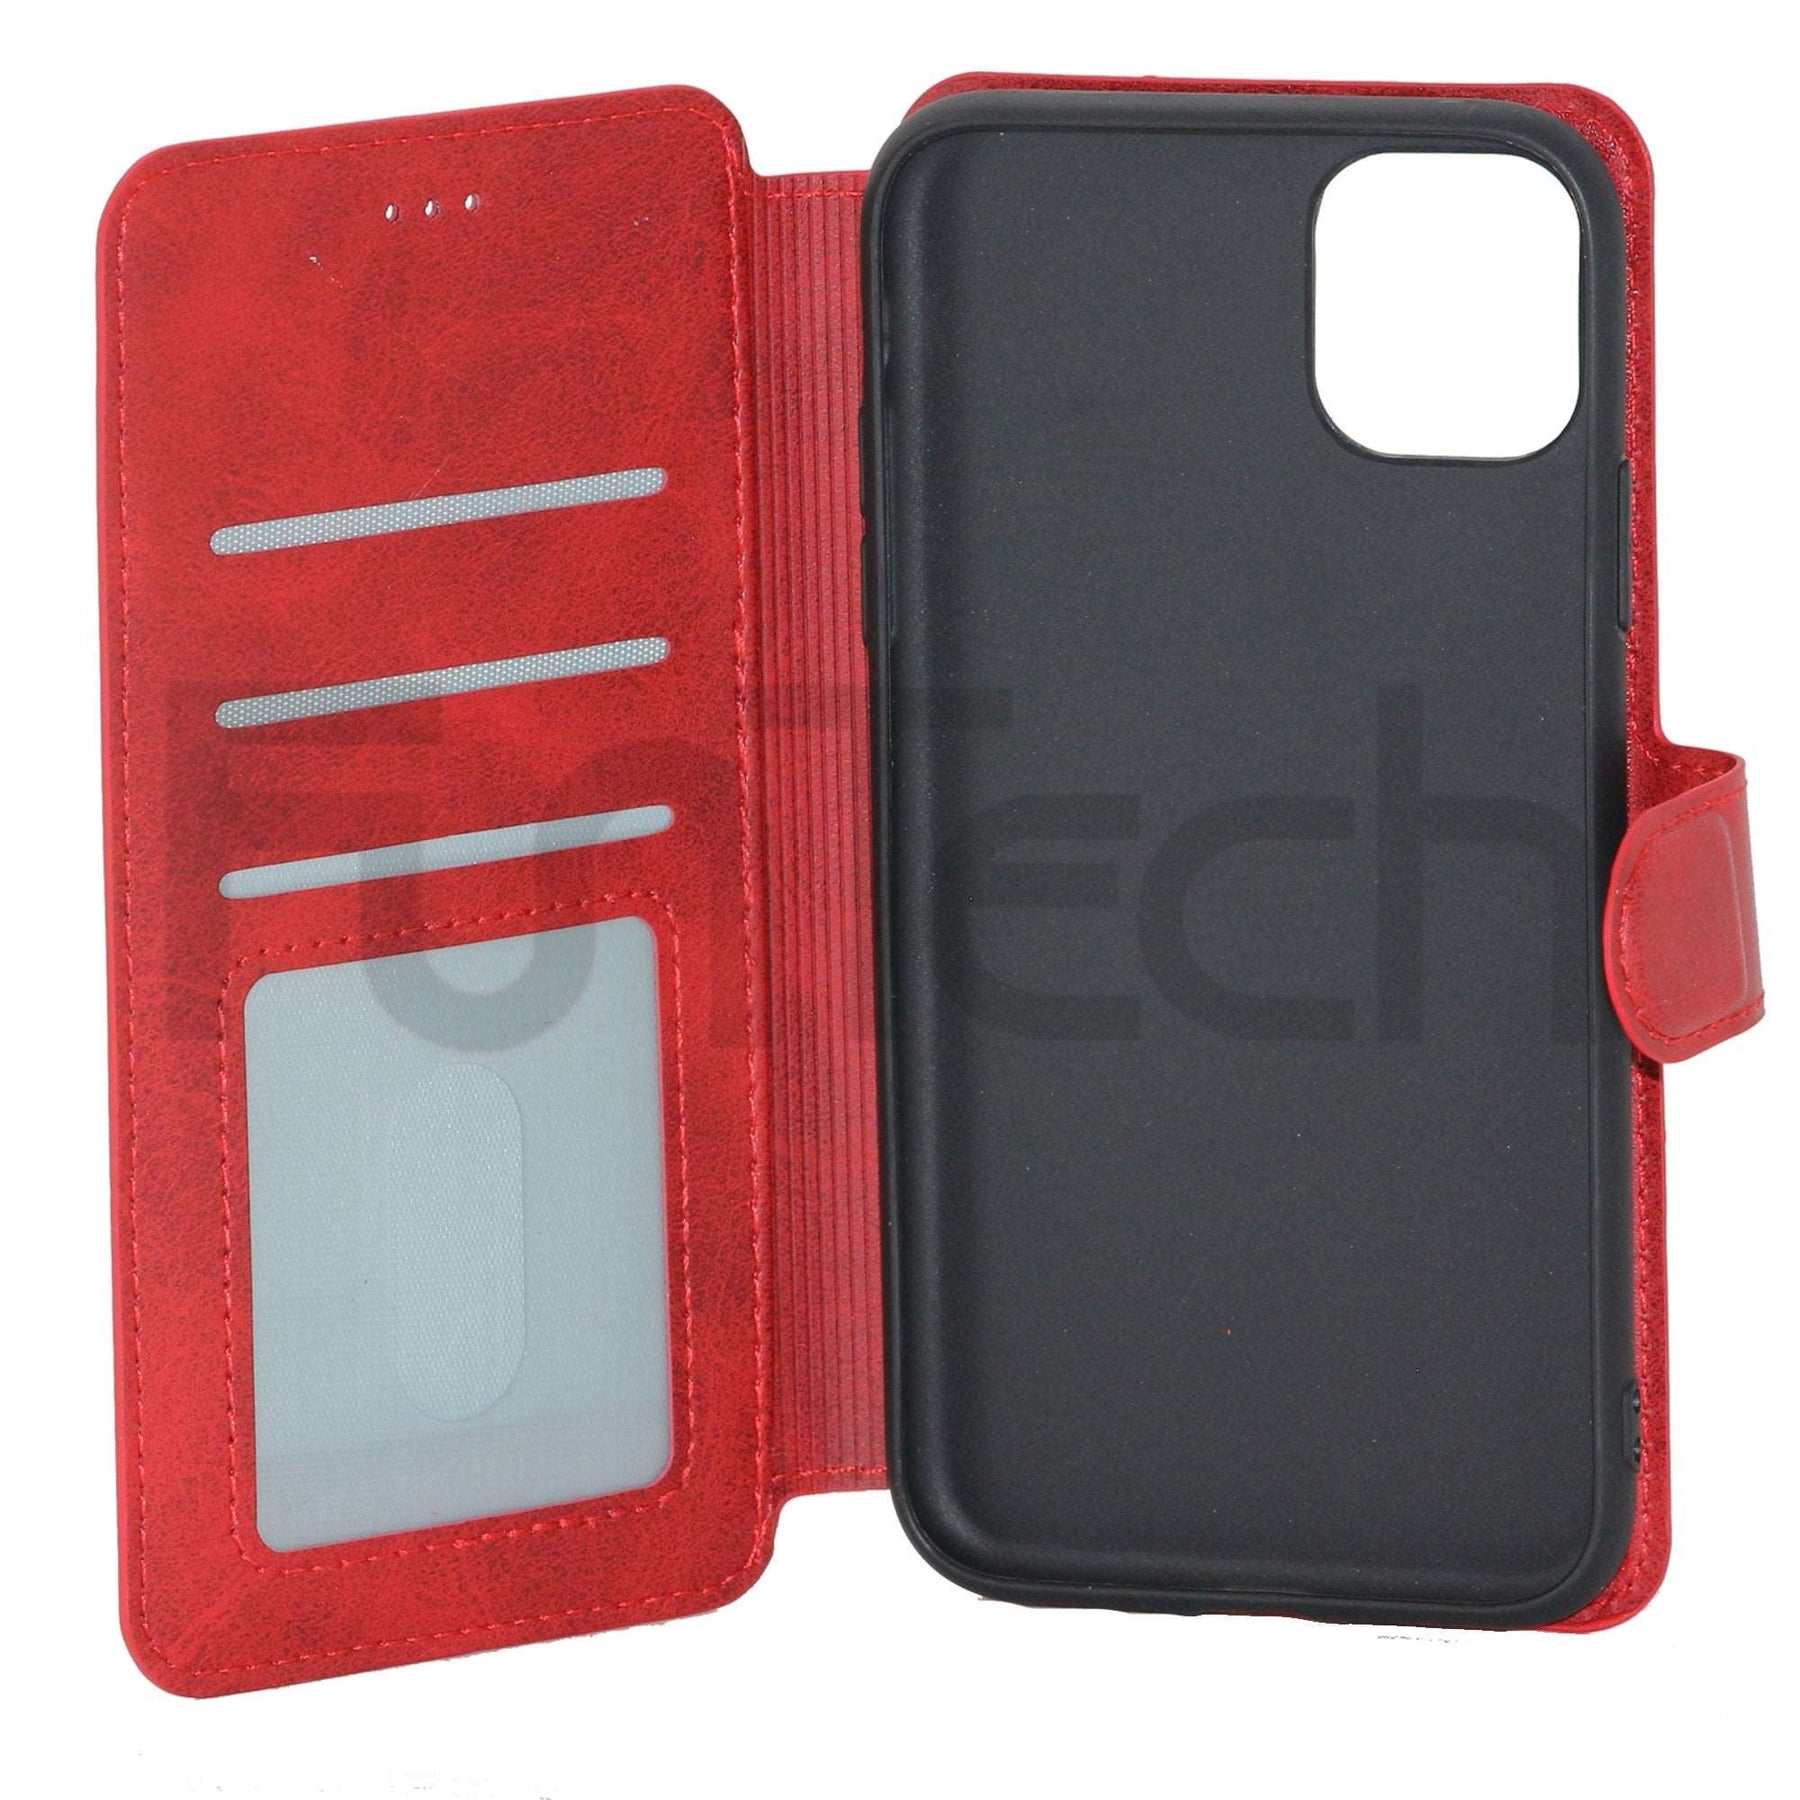 Apple iPhone 12 Pro Max Case Red